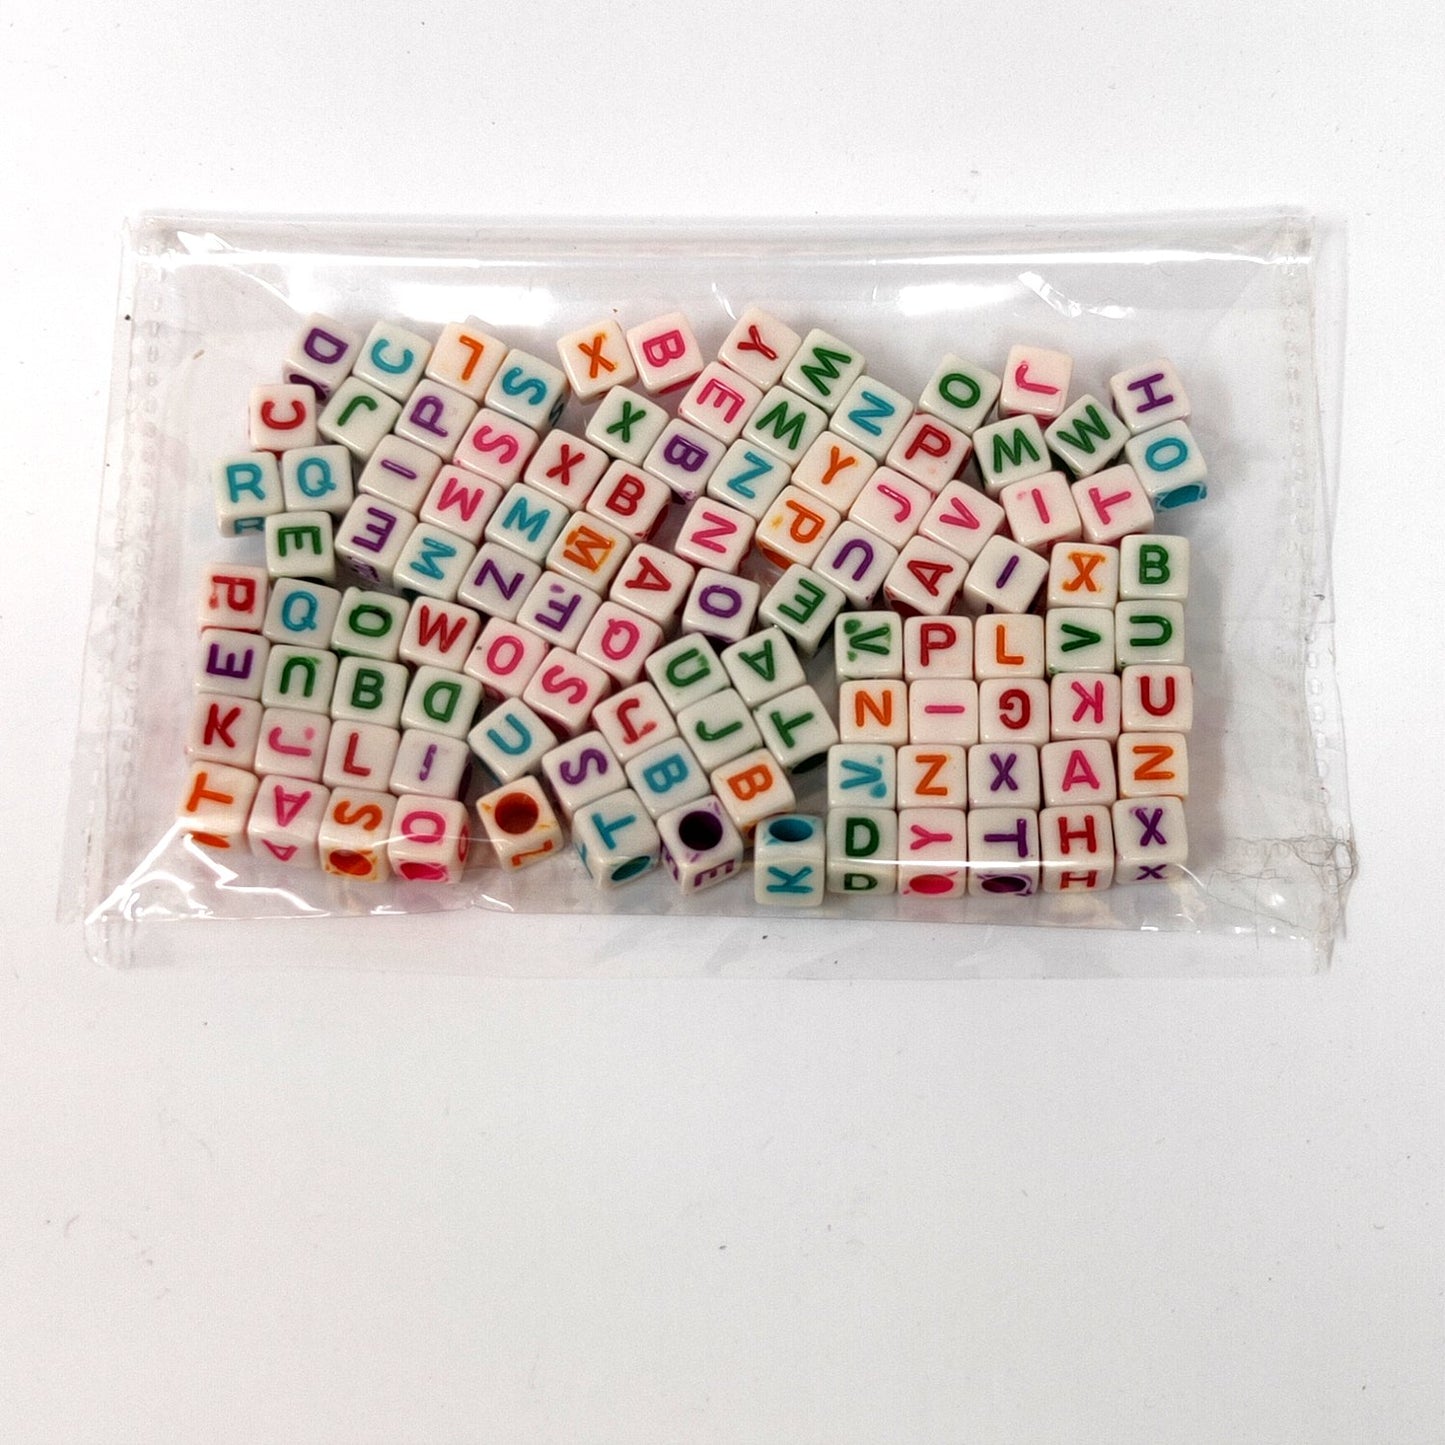 5 mm Plastic Alphabetic Cube Beads for Jewellery Making and Decoration (100 Beads) - 96-08